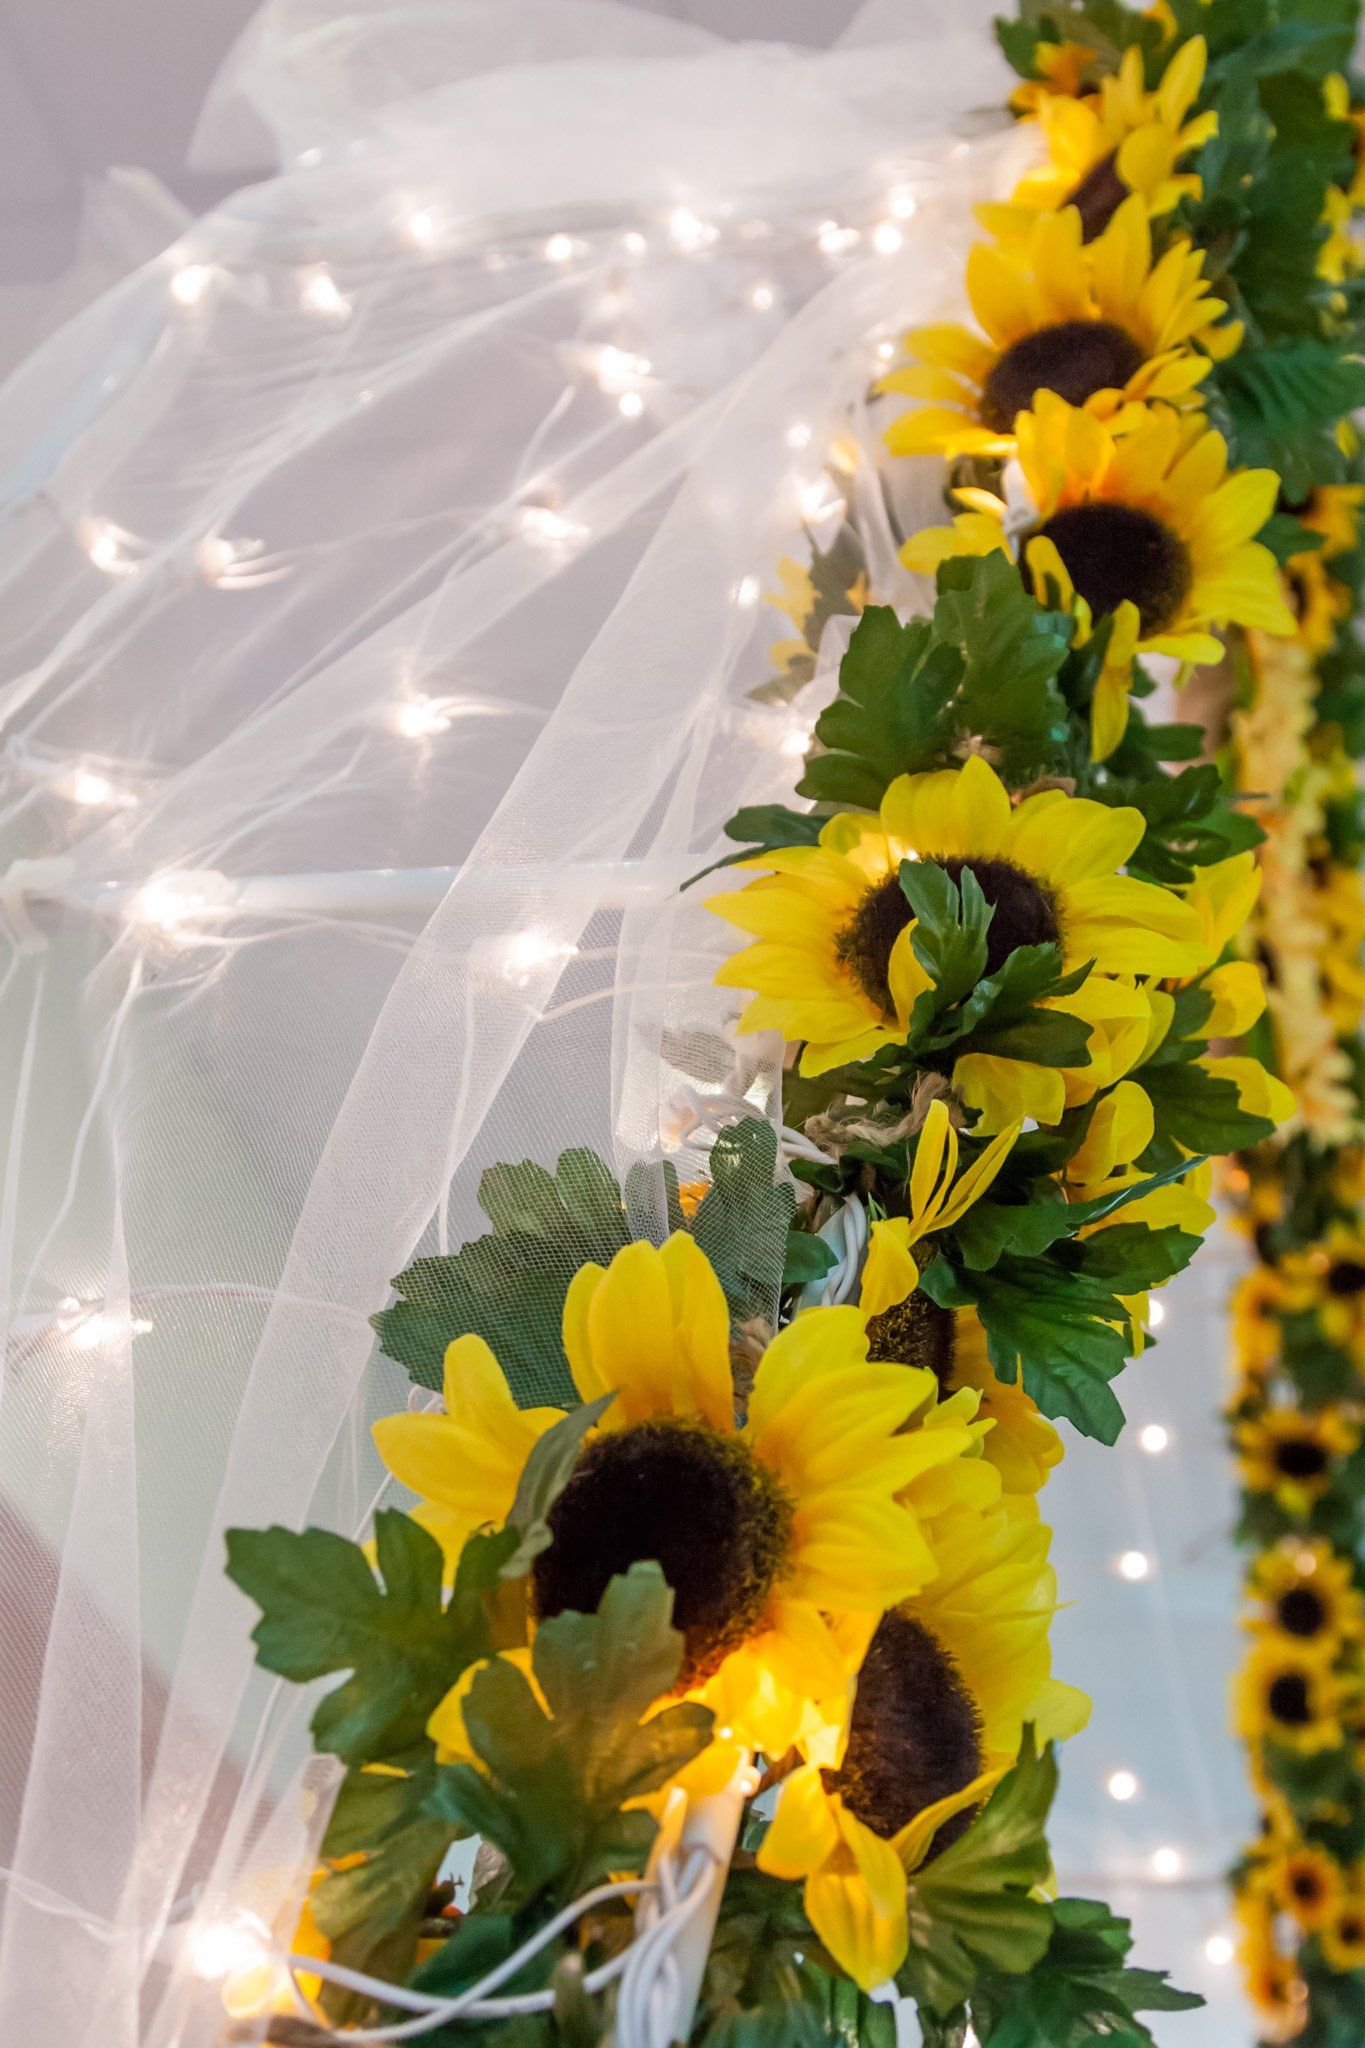 A picture of white tulle and yellow flowers from the reception